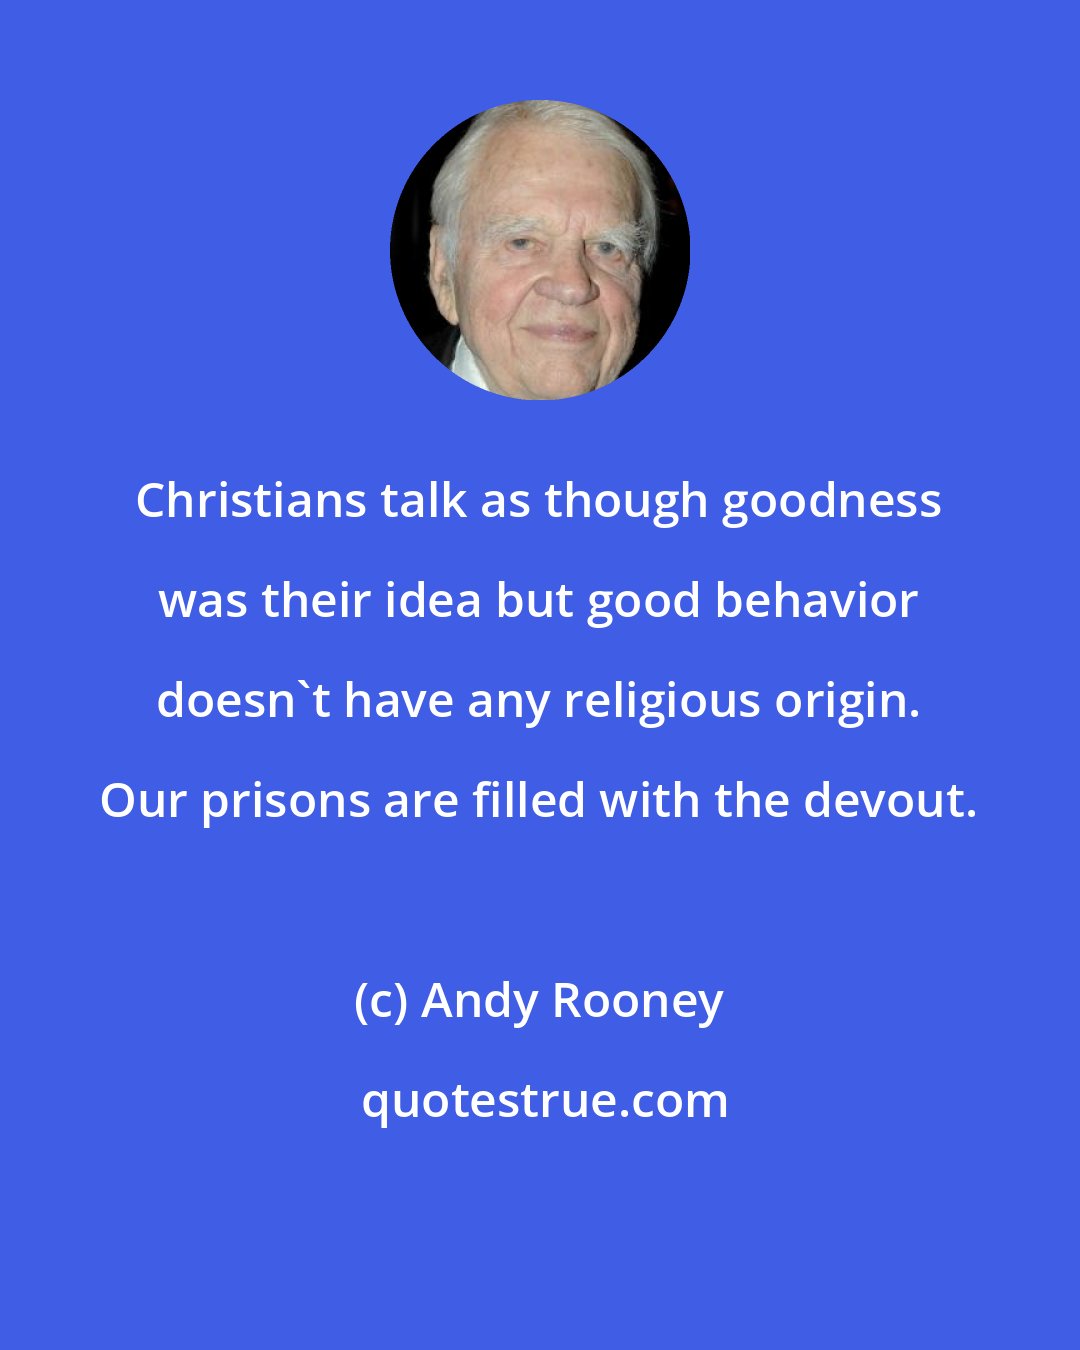 Andy Rooney: Christians talk as though goodness was their idea but good behavior doesn't have any religious origin. Our prisons are filled with the devout.